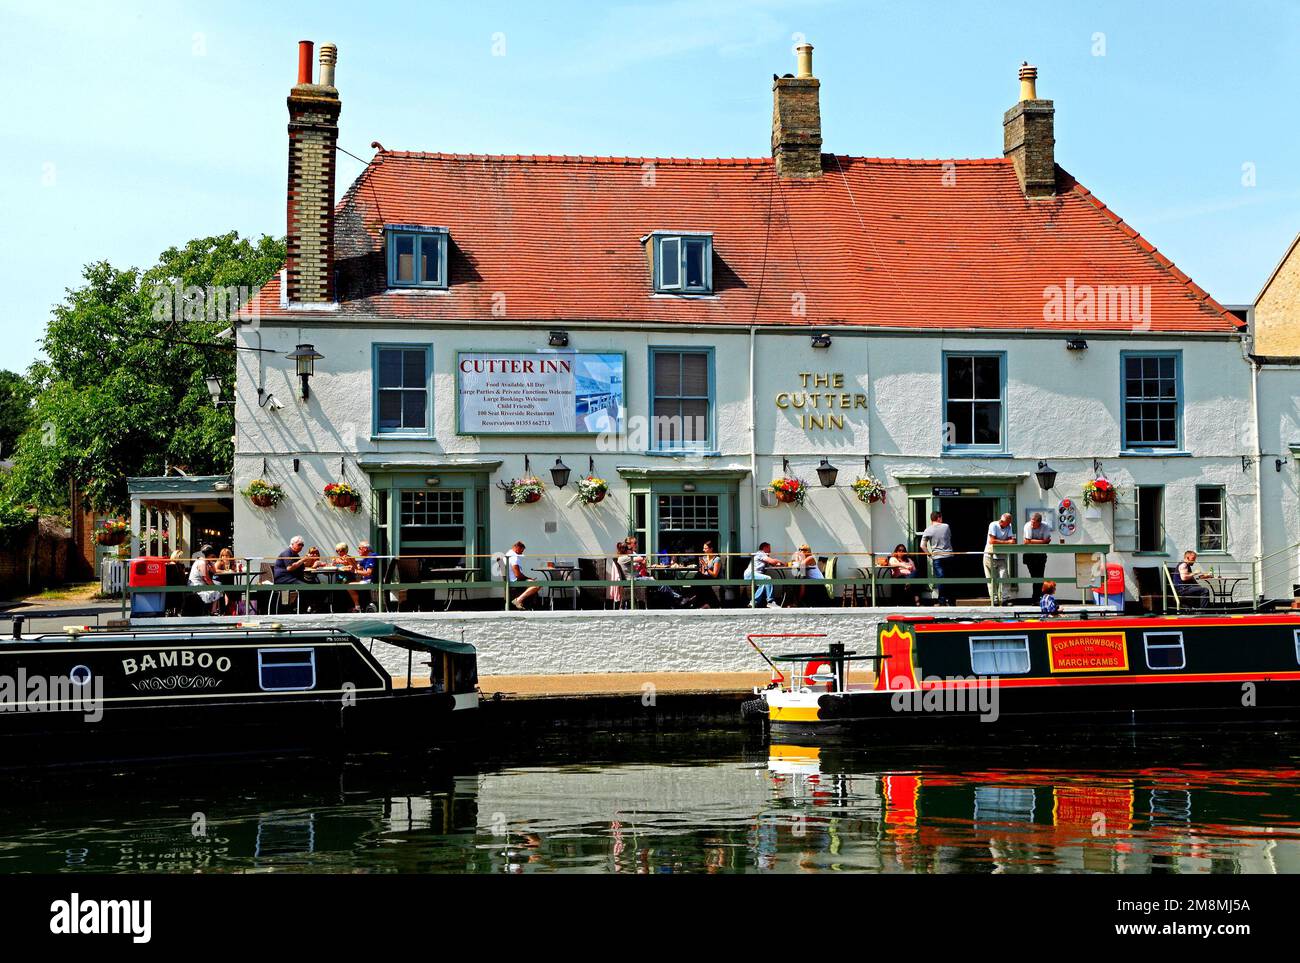 Ely, The Cutter Inn, barges, River Ouse, Cambridgeshire, England, UK Stock Photo